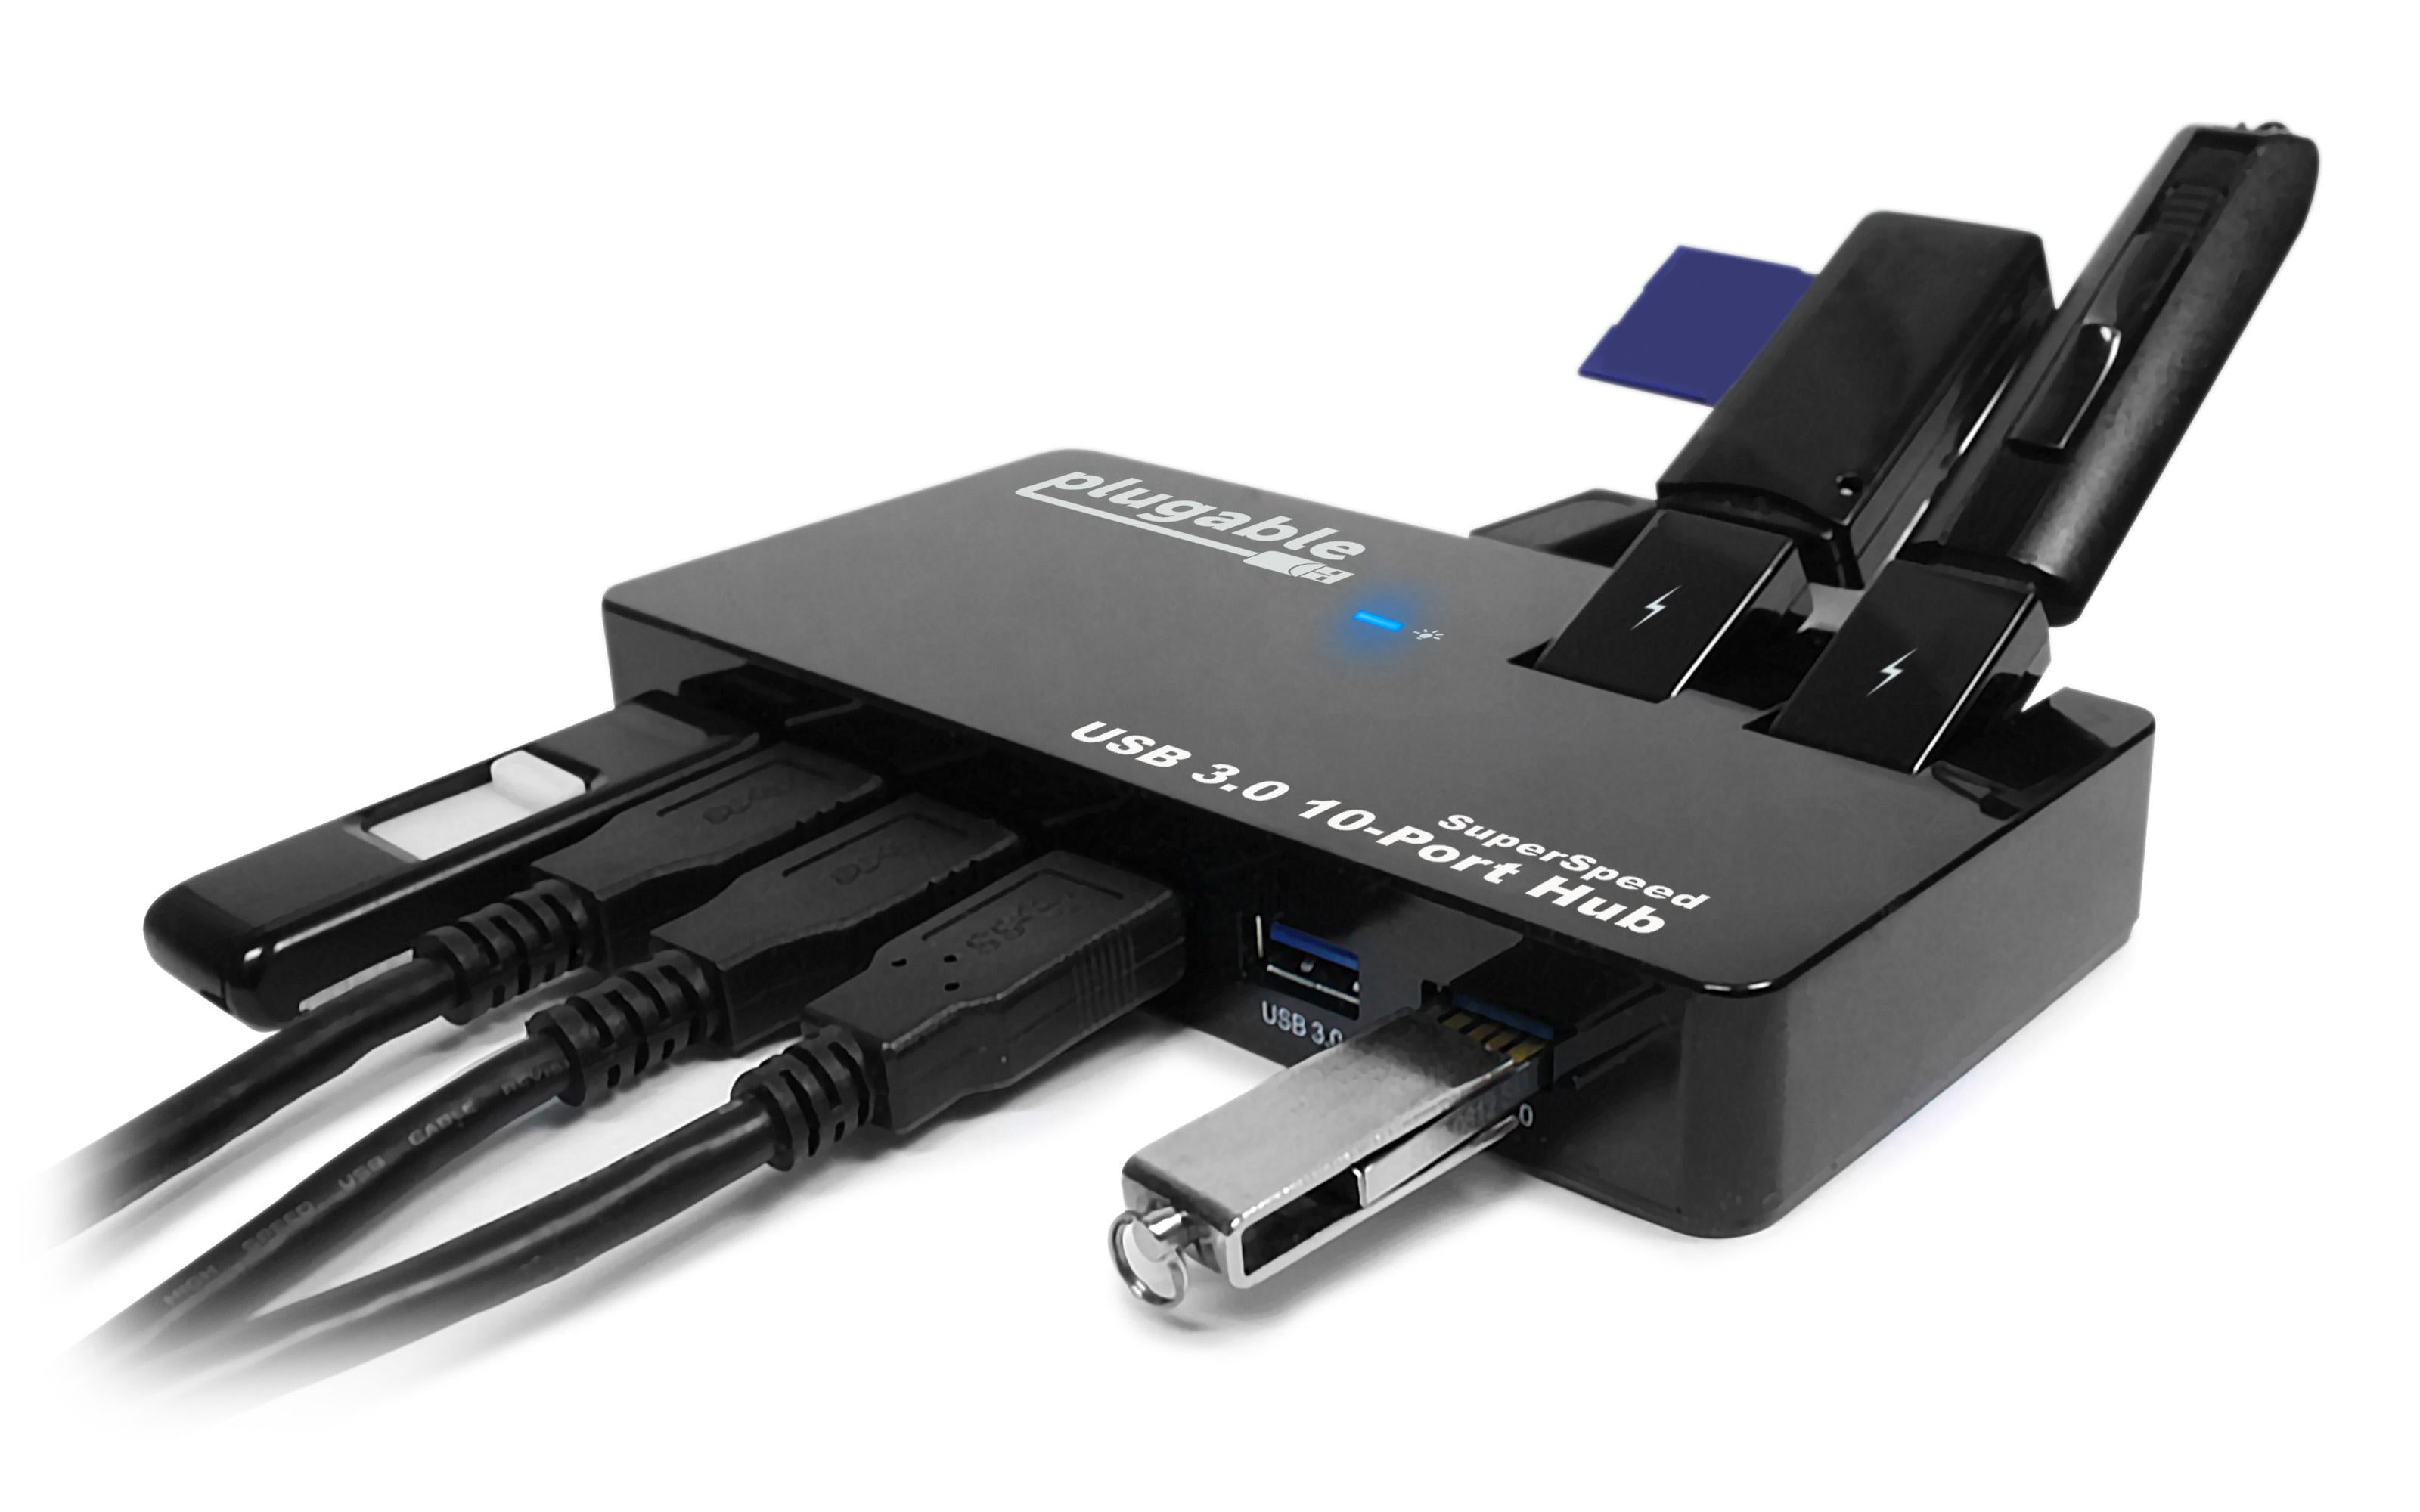 Image of the Plugable USB 3.0 10-port hub connecting a number of different devices